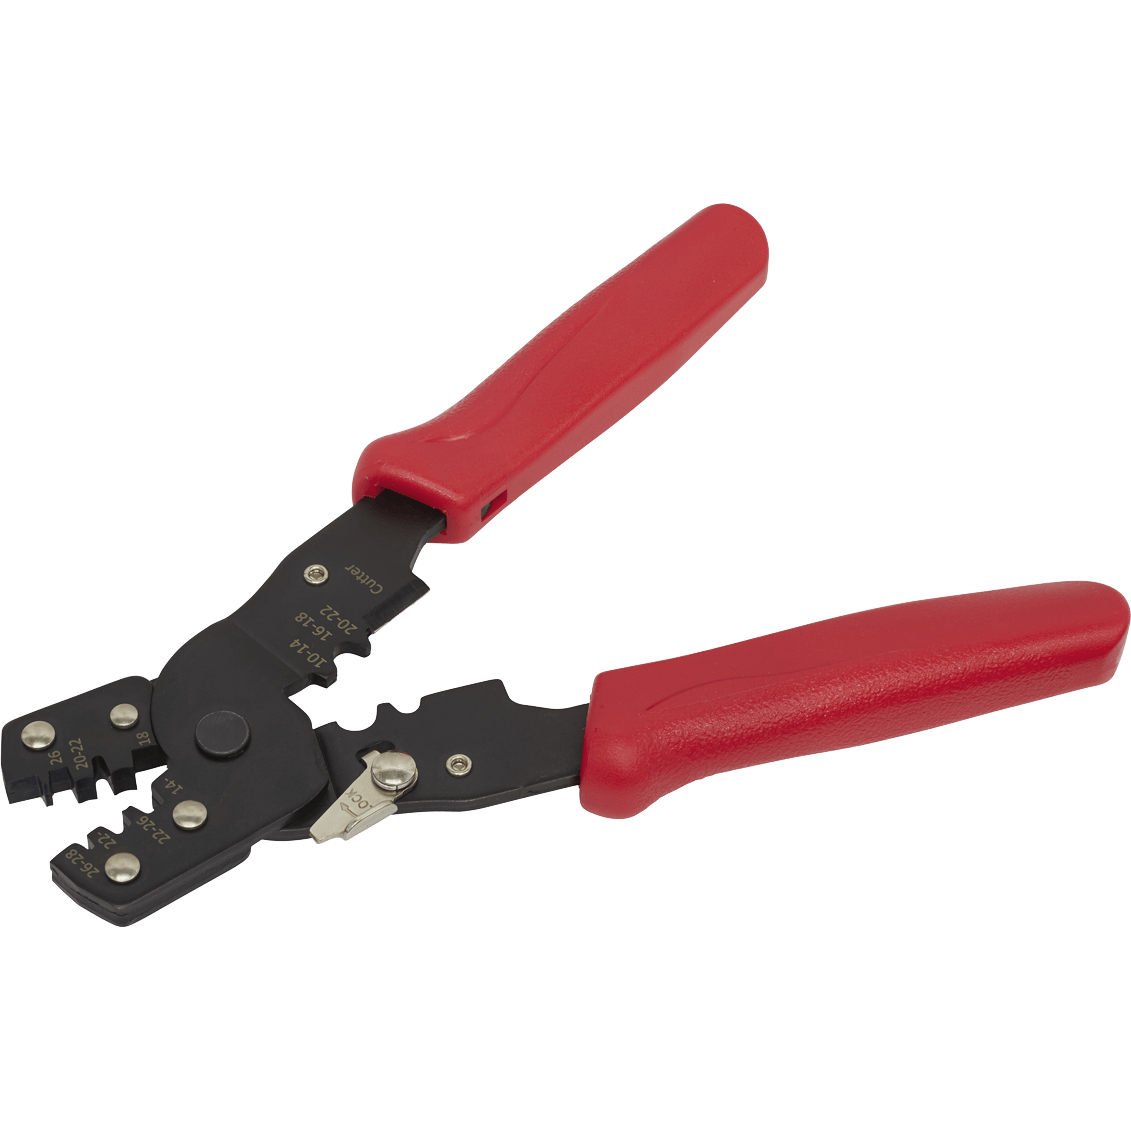 Photos - Pliers / Wire Cutters Sealey Non Ratcheting Crimping Tool AK3850 